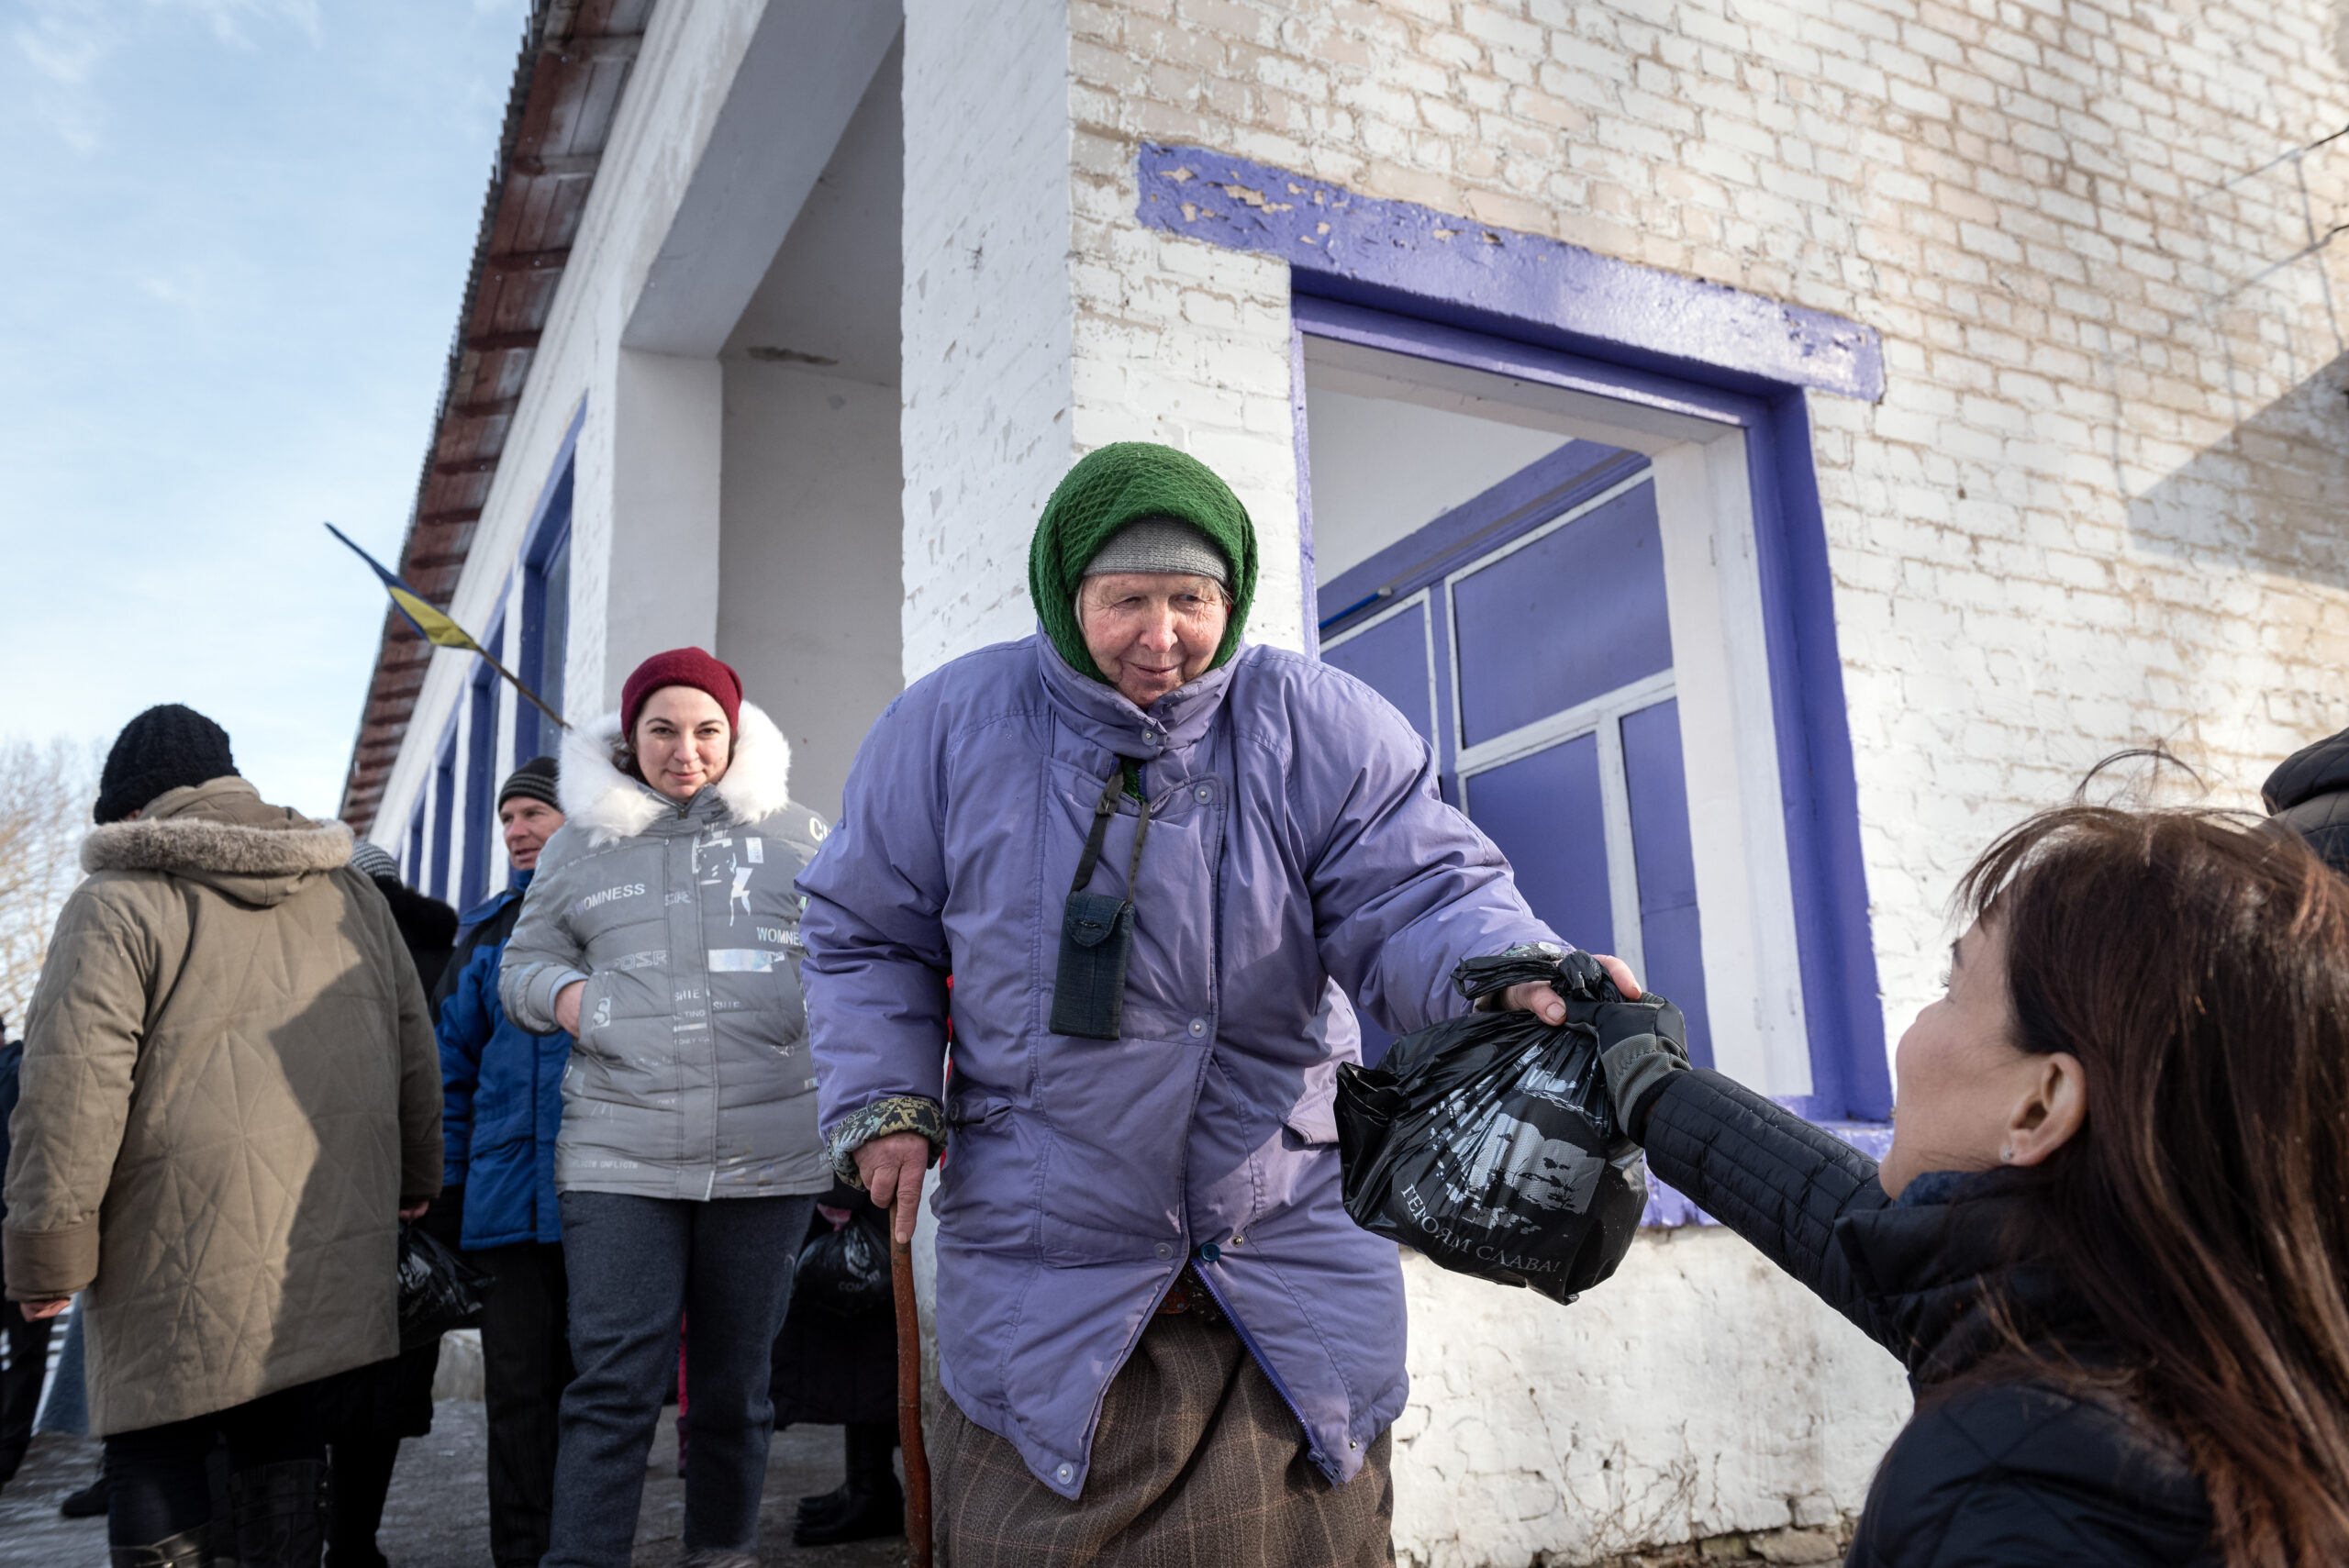 A woman reaches for a bag of food that Mike Domke, an IMB missionary, and Cade and Ginny Wheeler of Send Relief, distributed food packets to people living near Kozelets, Ukraine. Send Relief partners with a local church to provide food packets to those in need in the community. IMB Photo